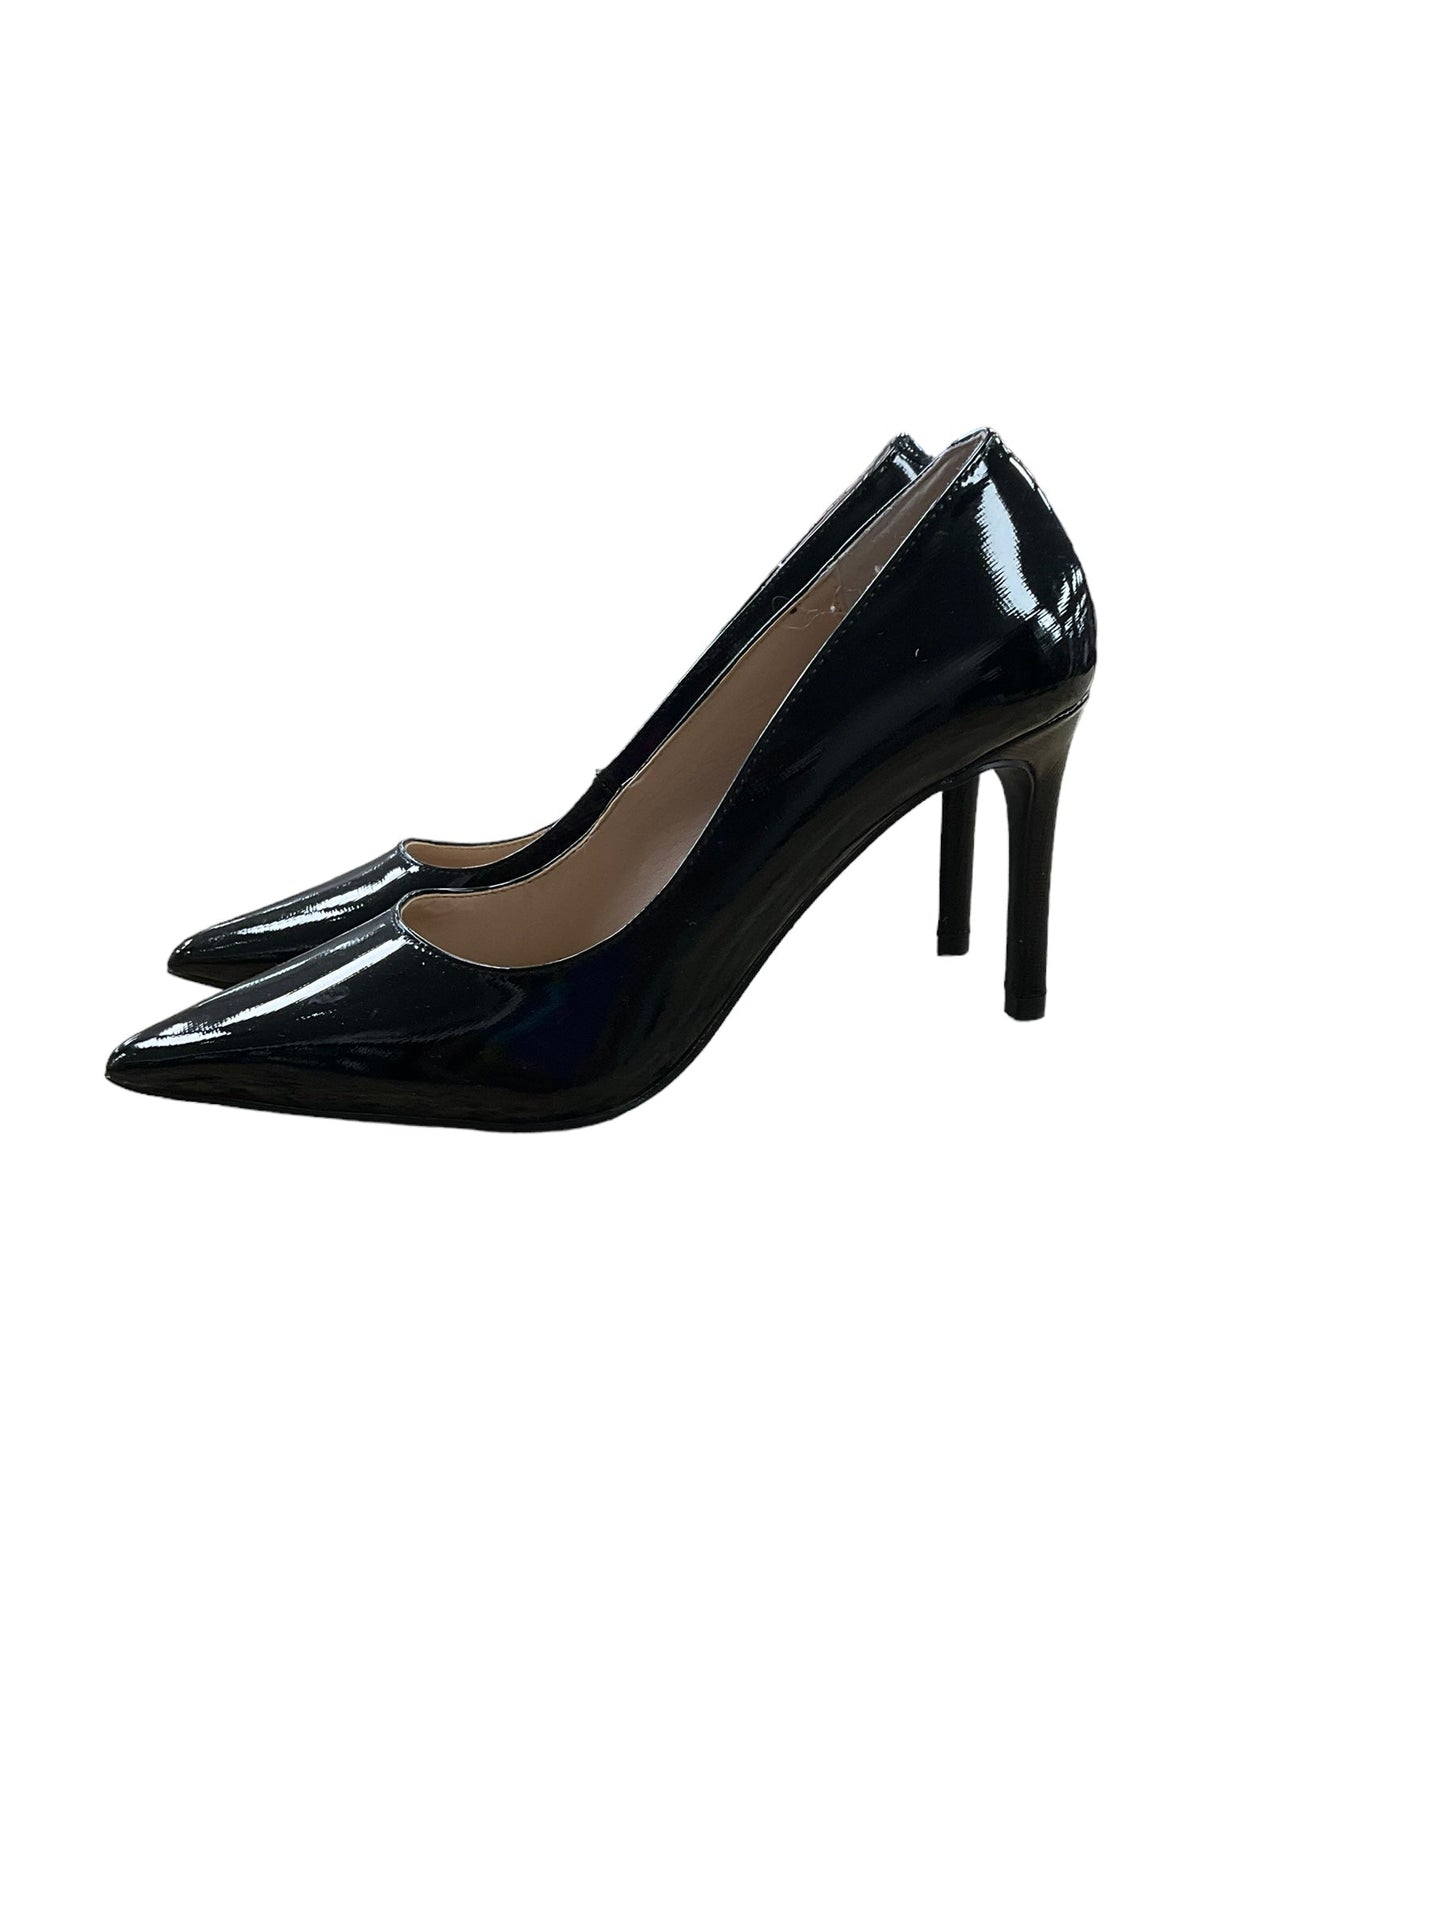 Shoes Heels Stiletto By White House Black Market  Size: 6